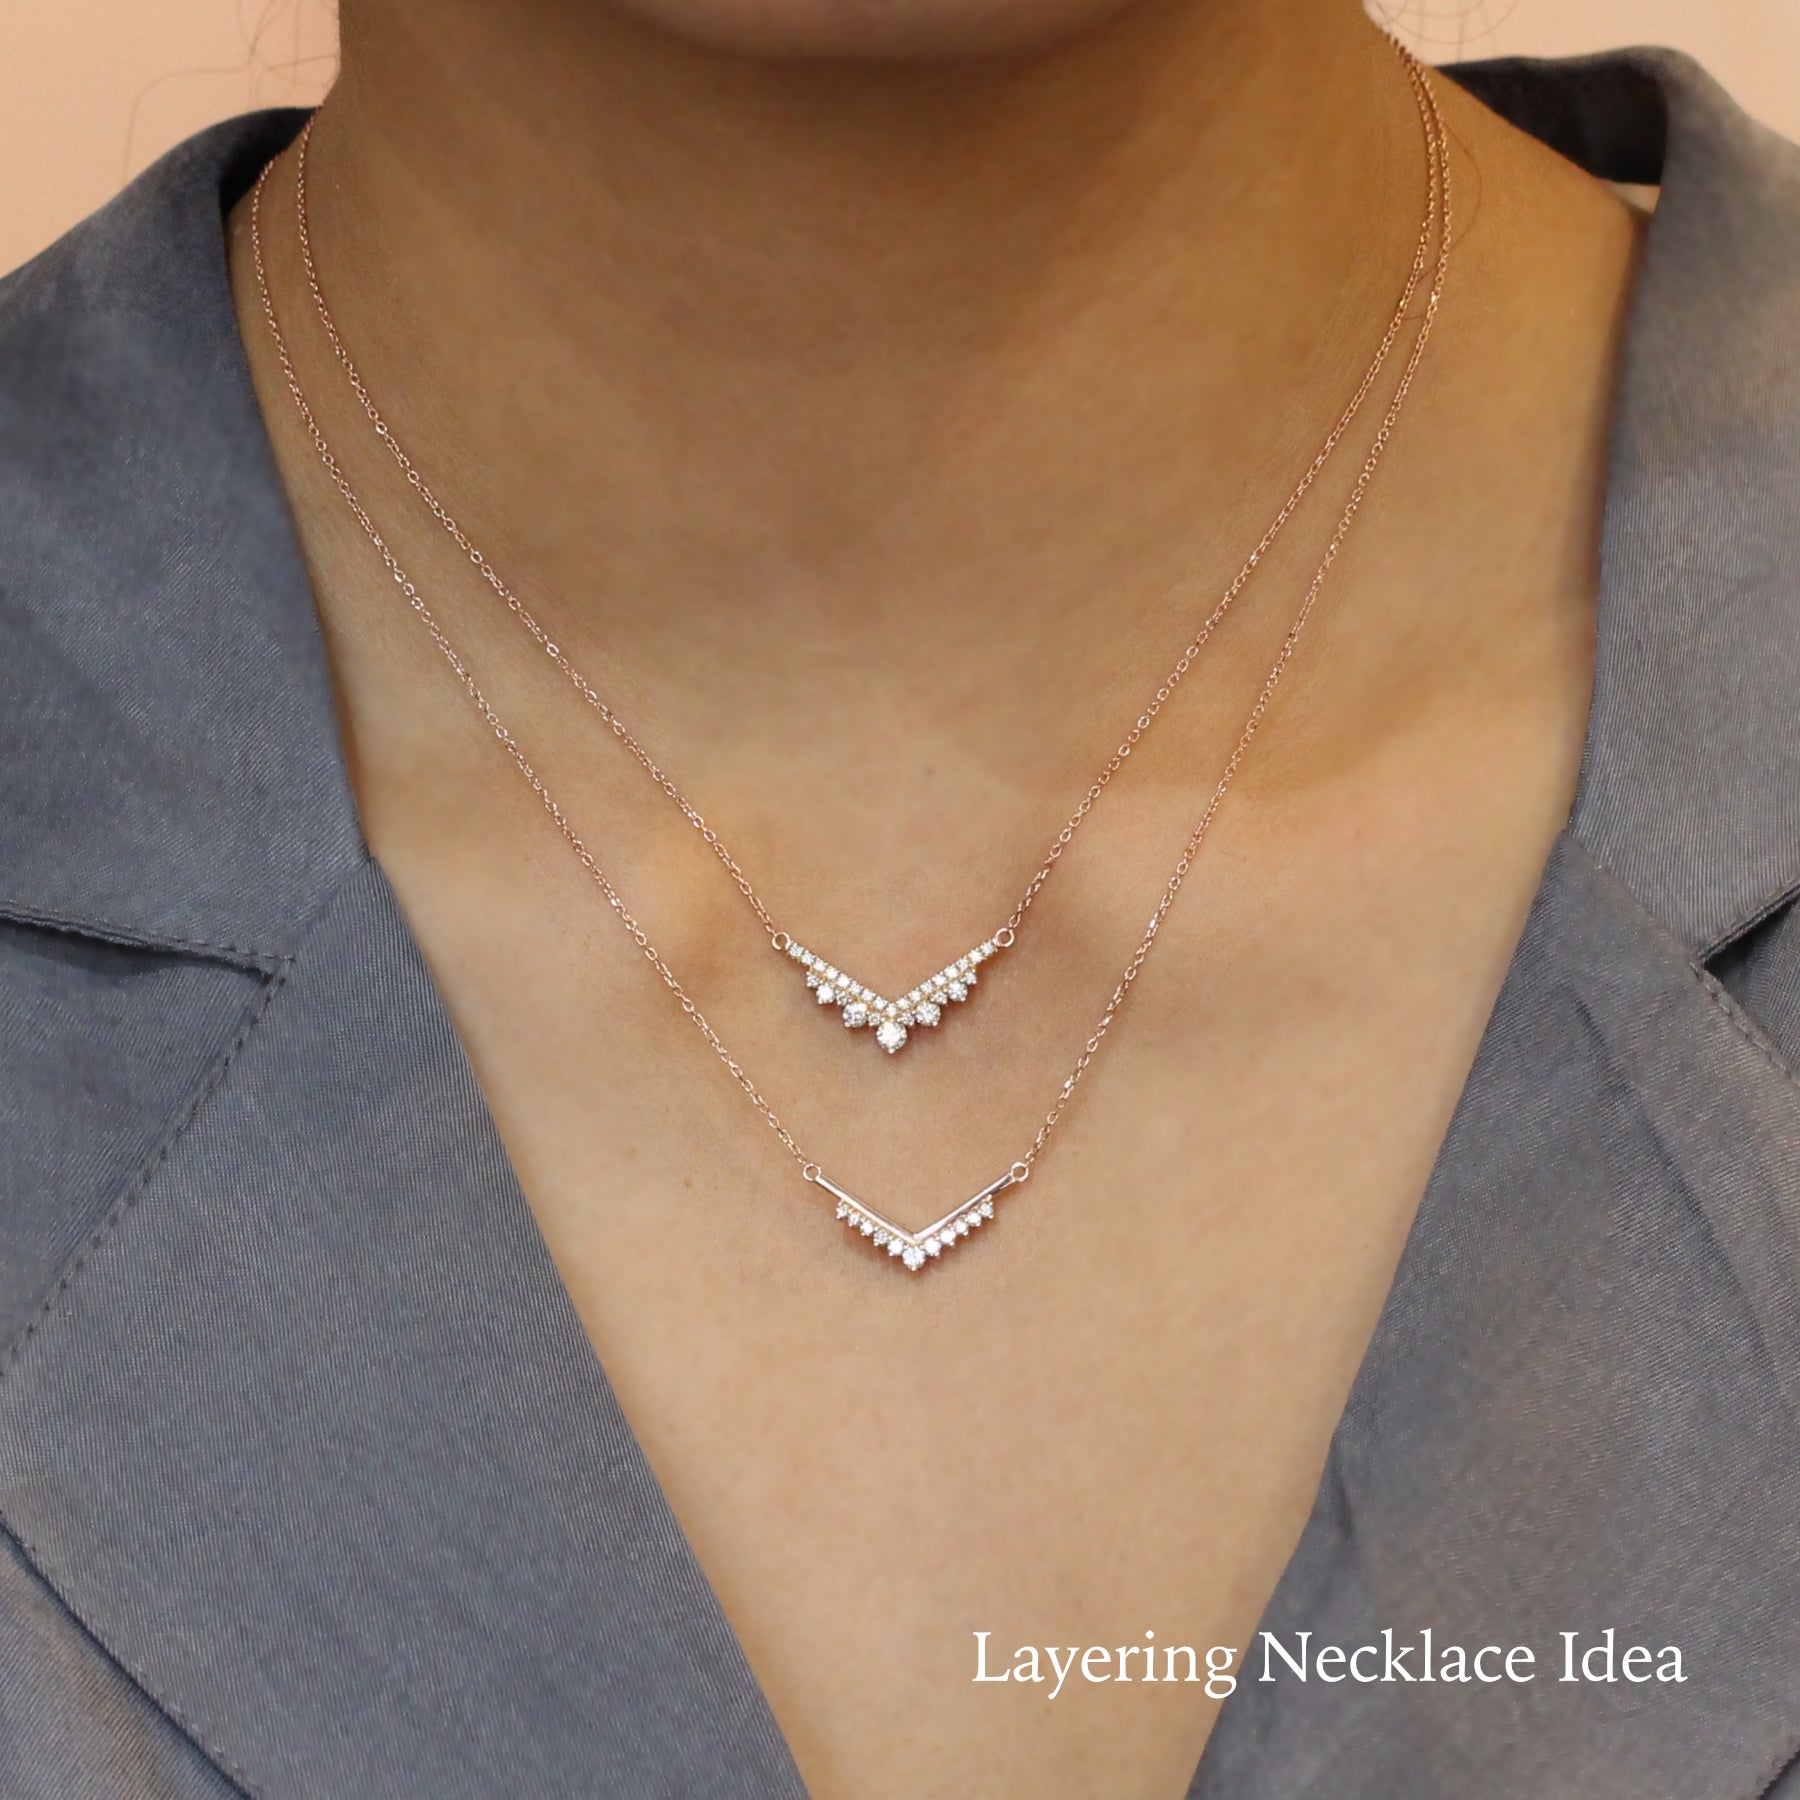 Three necklaces perfectly layered, and a ginormous oval shape